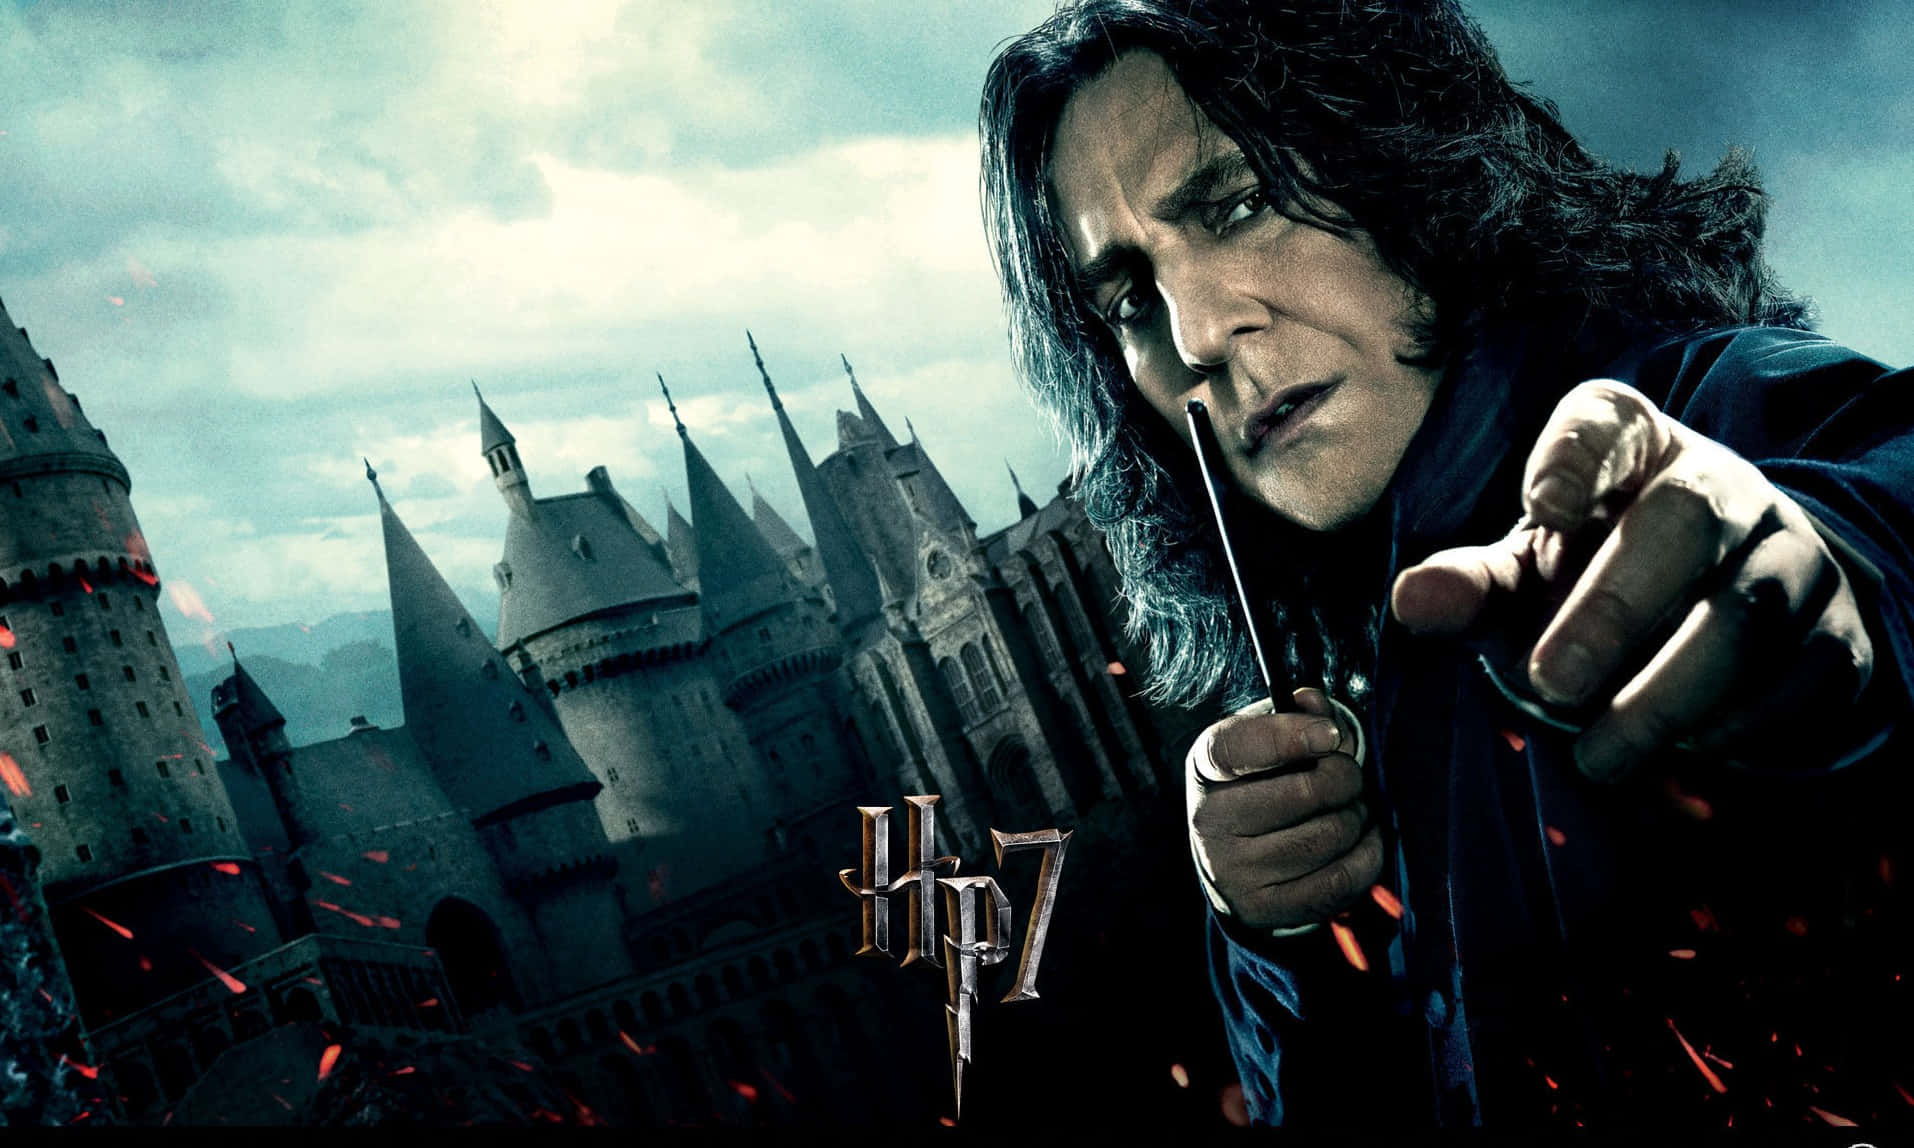 “Behold the power of The Deathly Hallows” Wallpaper